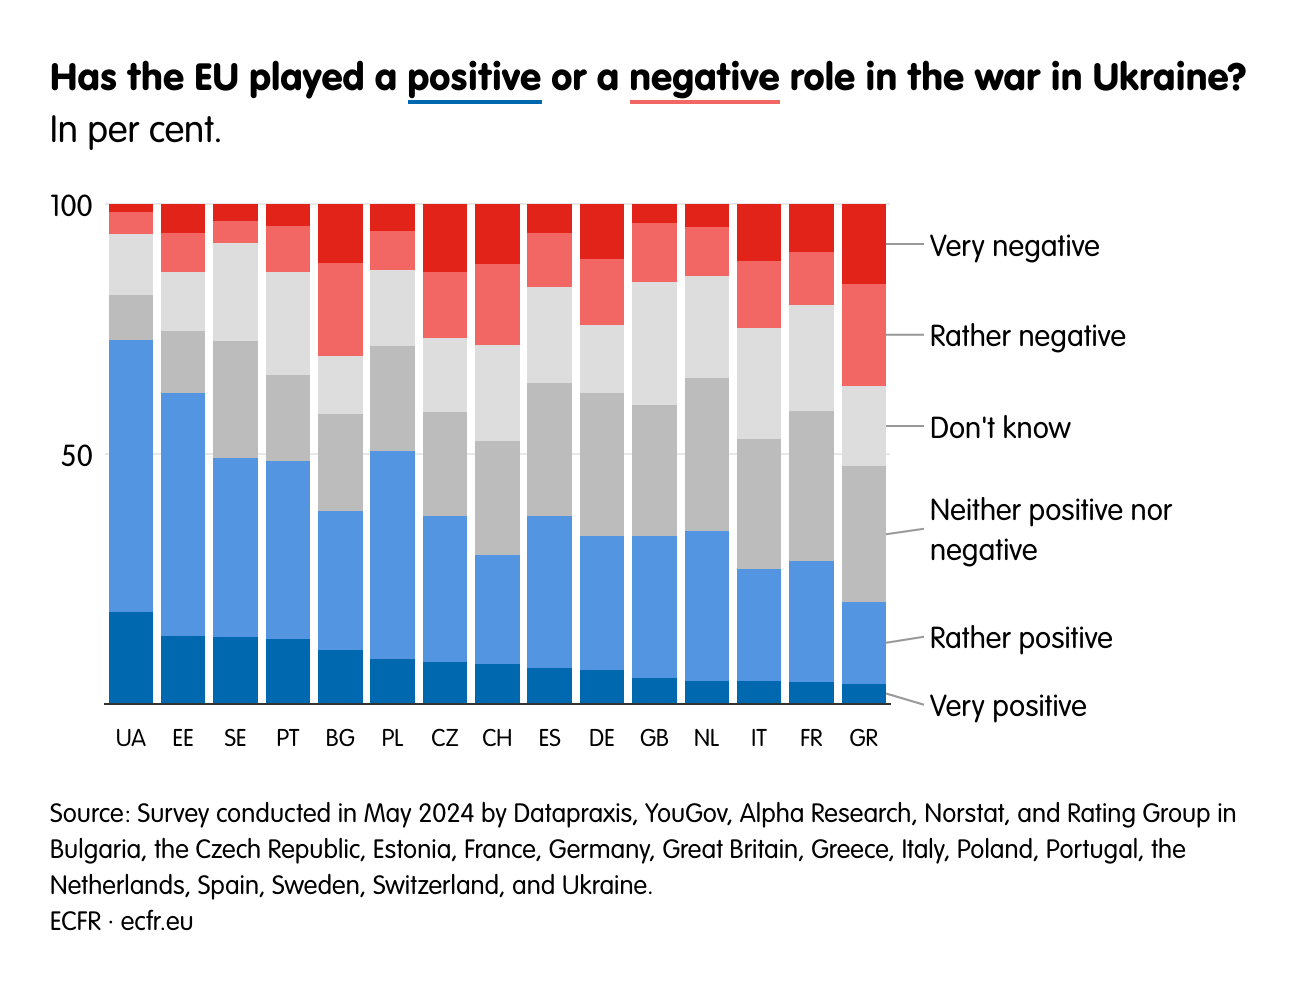 Has the EU played a positive or a negative role in the war in Ukraine?